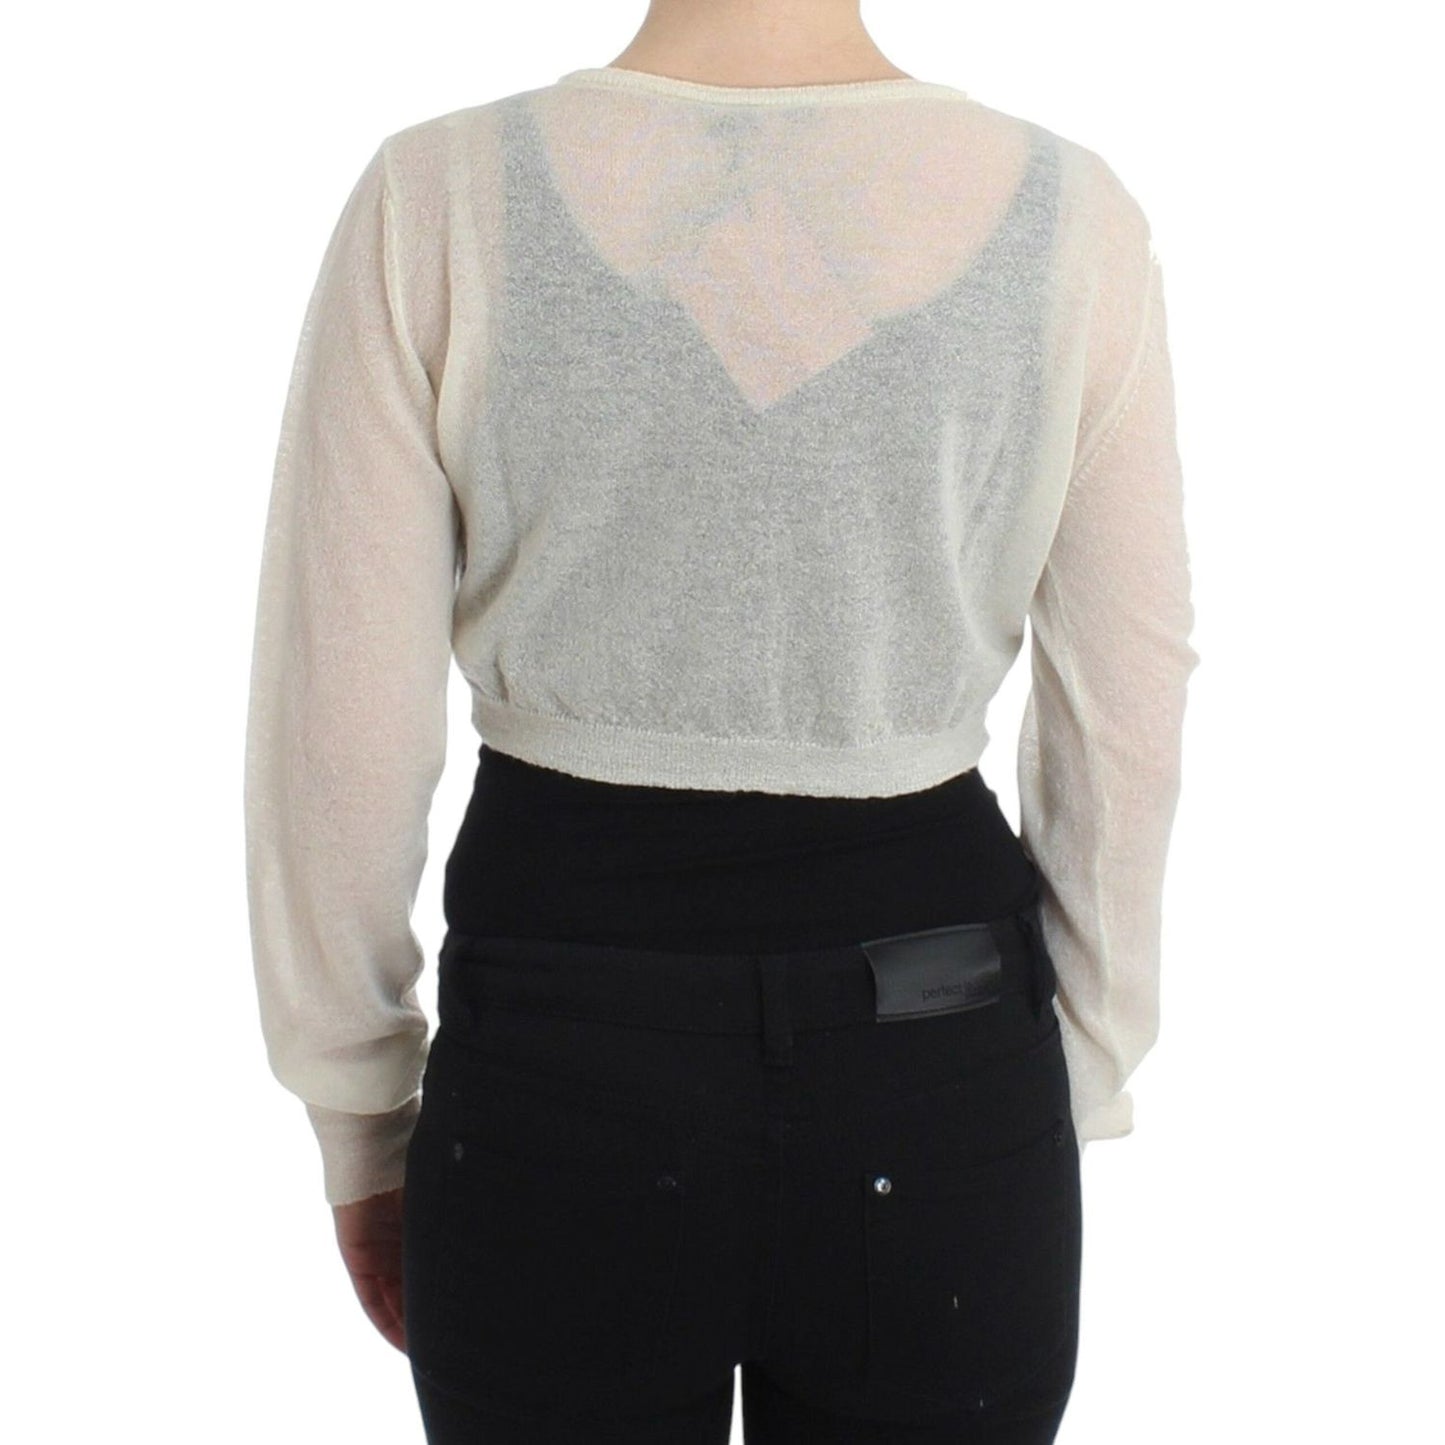 Ermanno Scervino Chic Cropped Alpaca Blend Sweater lingerie-knit-cropped-wool-sweater-cardigan-1